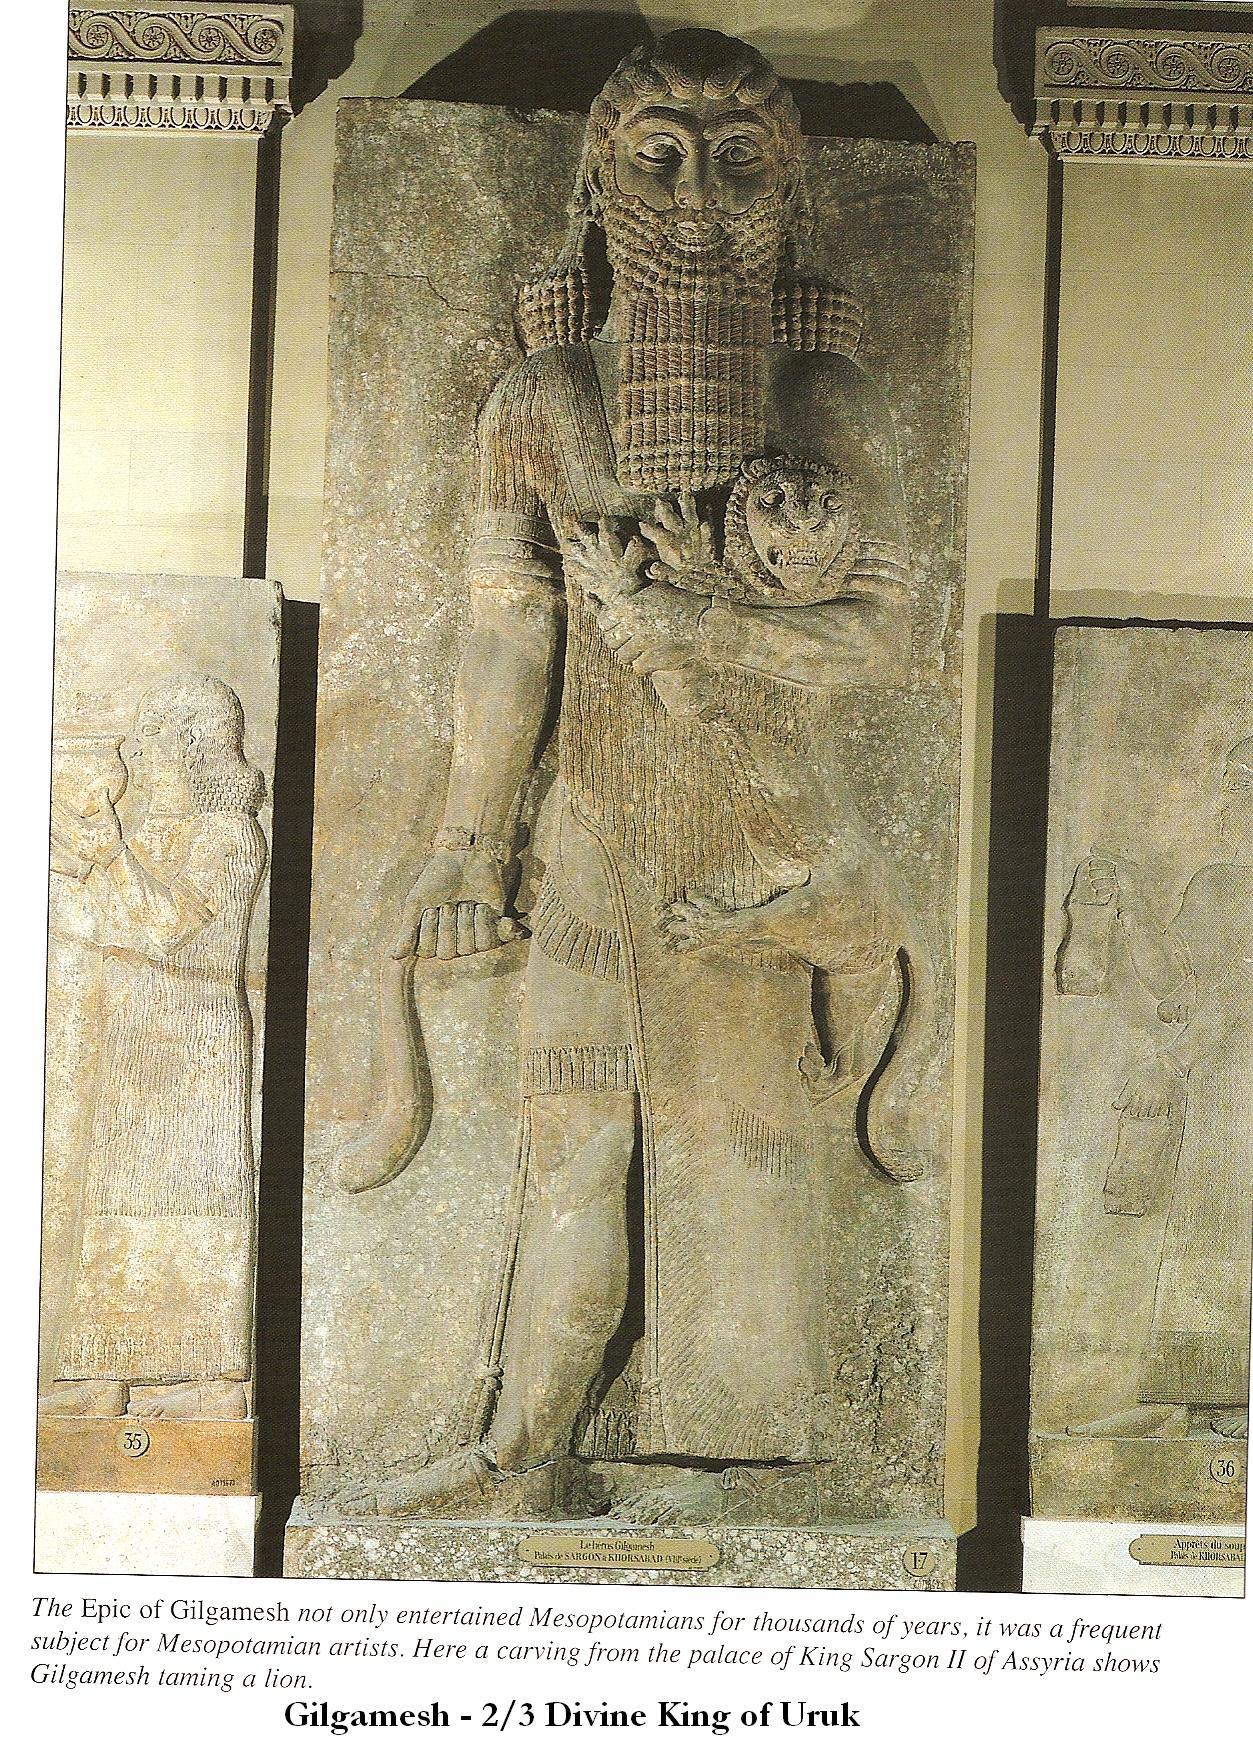 6a - Gilgamesh two-thirds divine son-king to Ninsun, a goddess resided in Uruk, desired to be immortal like his mother Ninsun